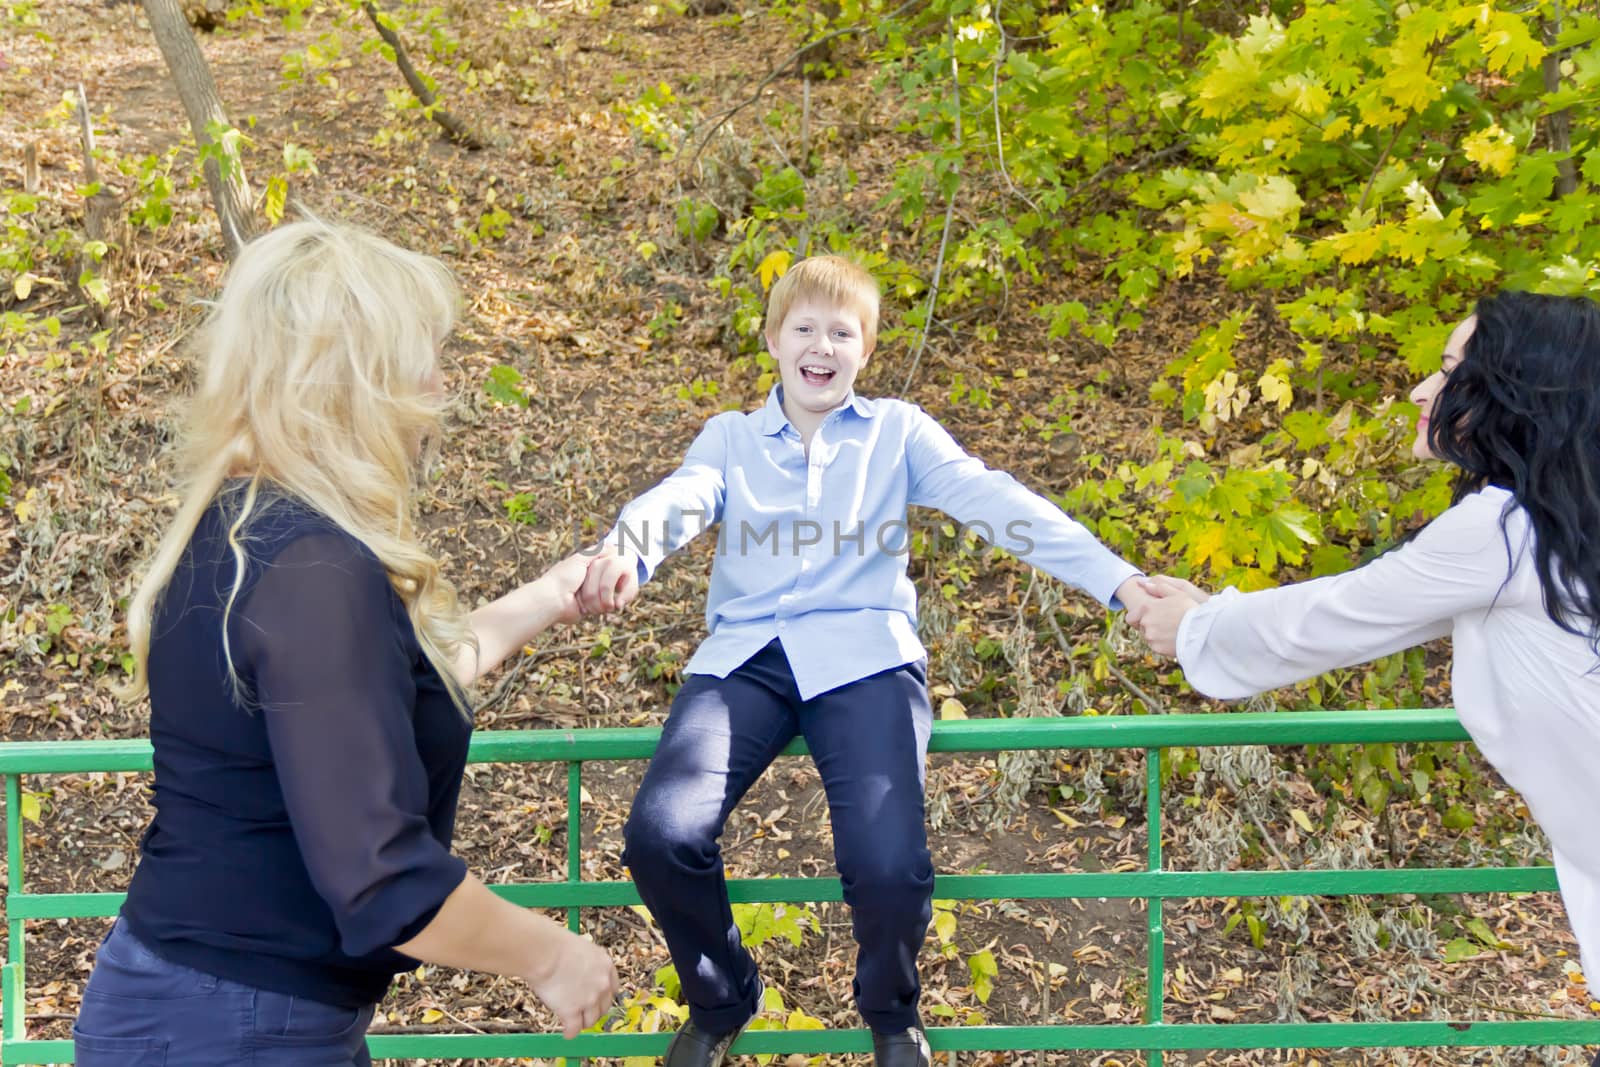 Two women pulling the boy to walk in autumn park